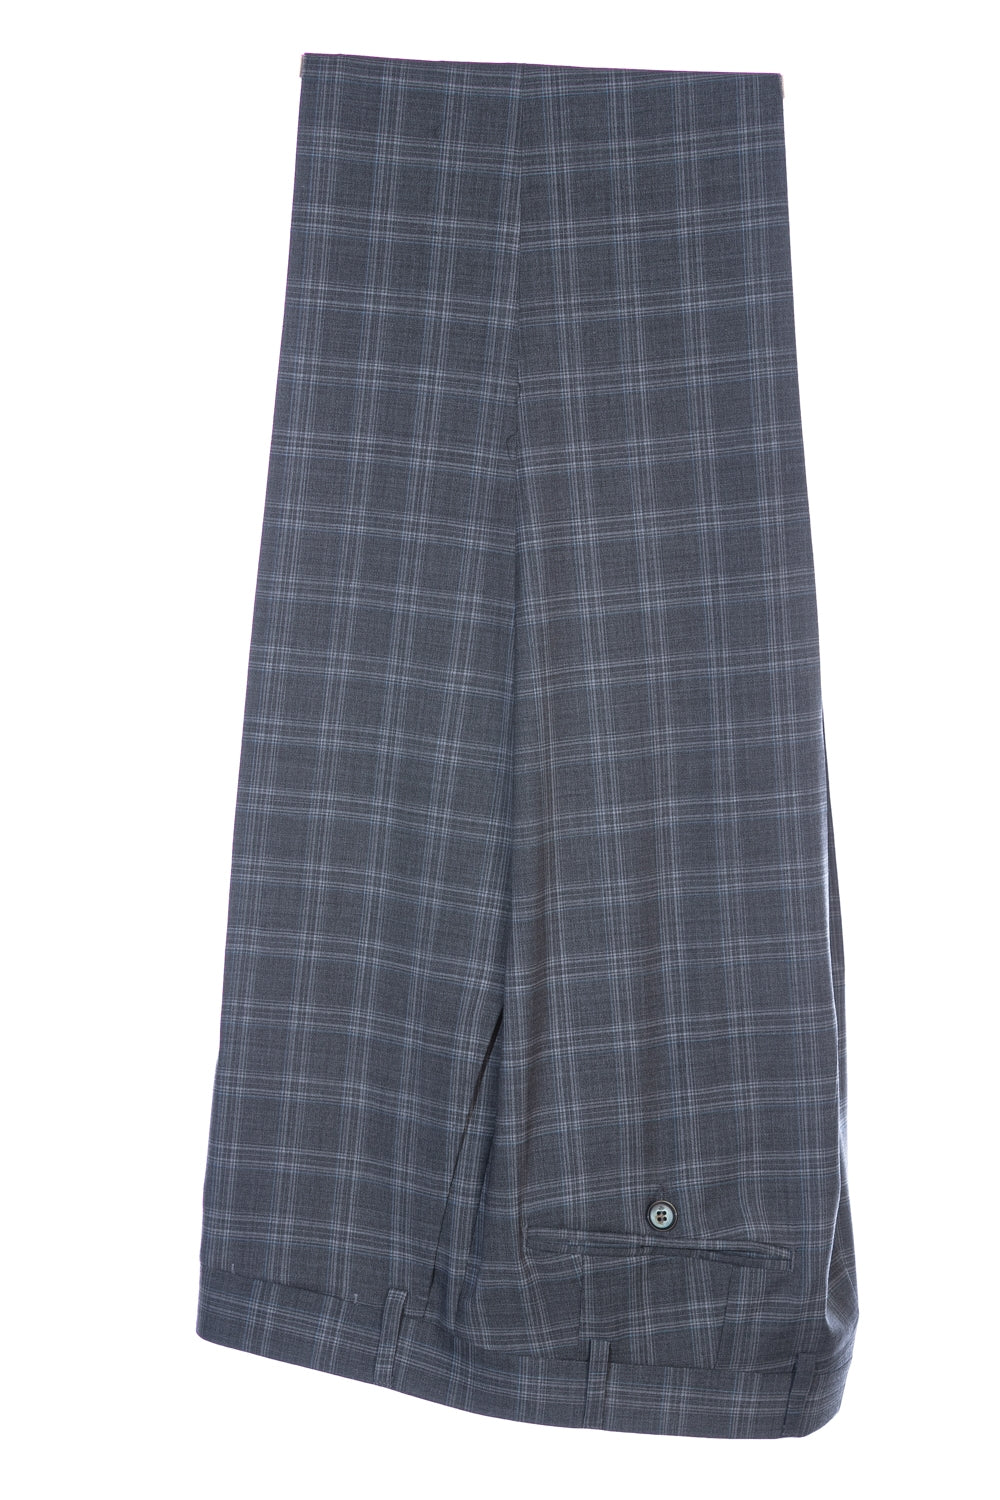 Canali Grey Check Suit in Grey Check Trouser